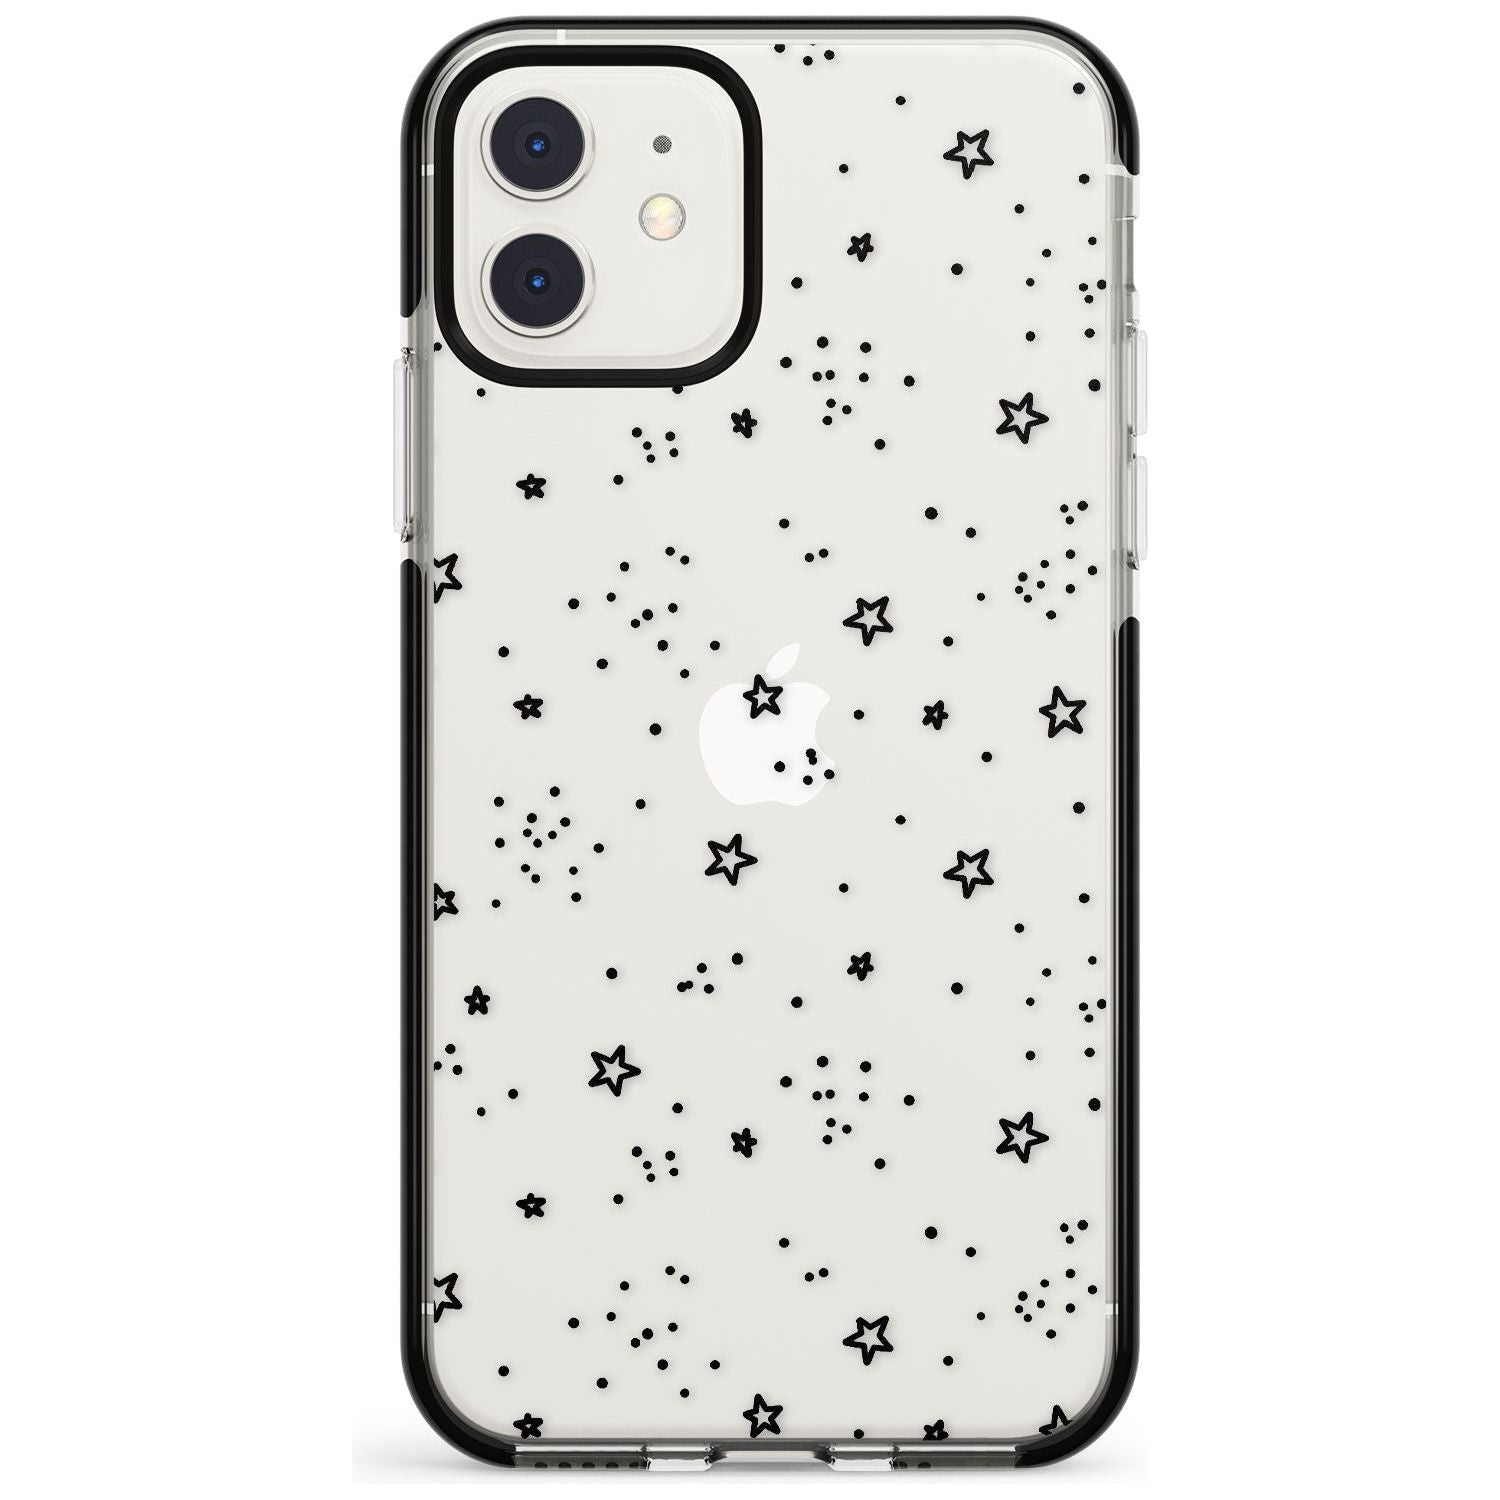 Star Outlines Black Impact Phone Case for iPhone 11